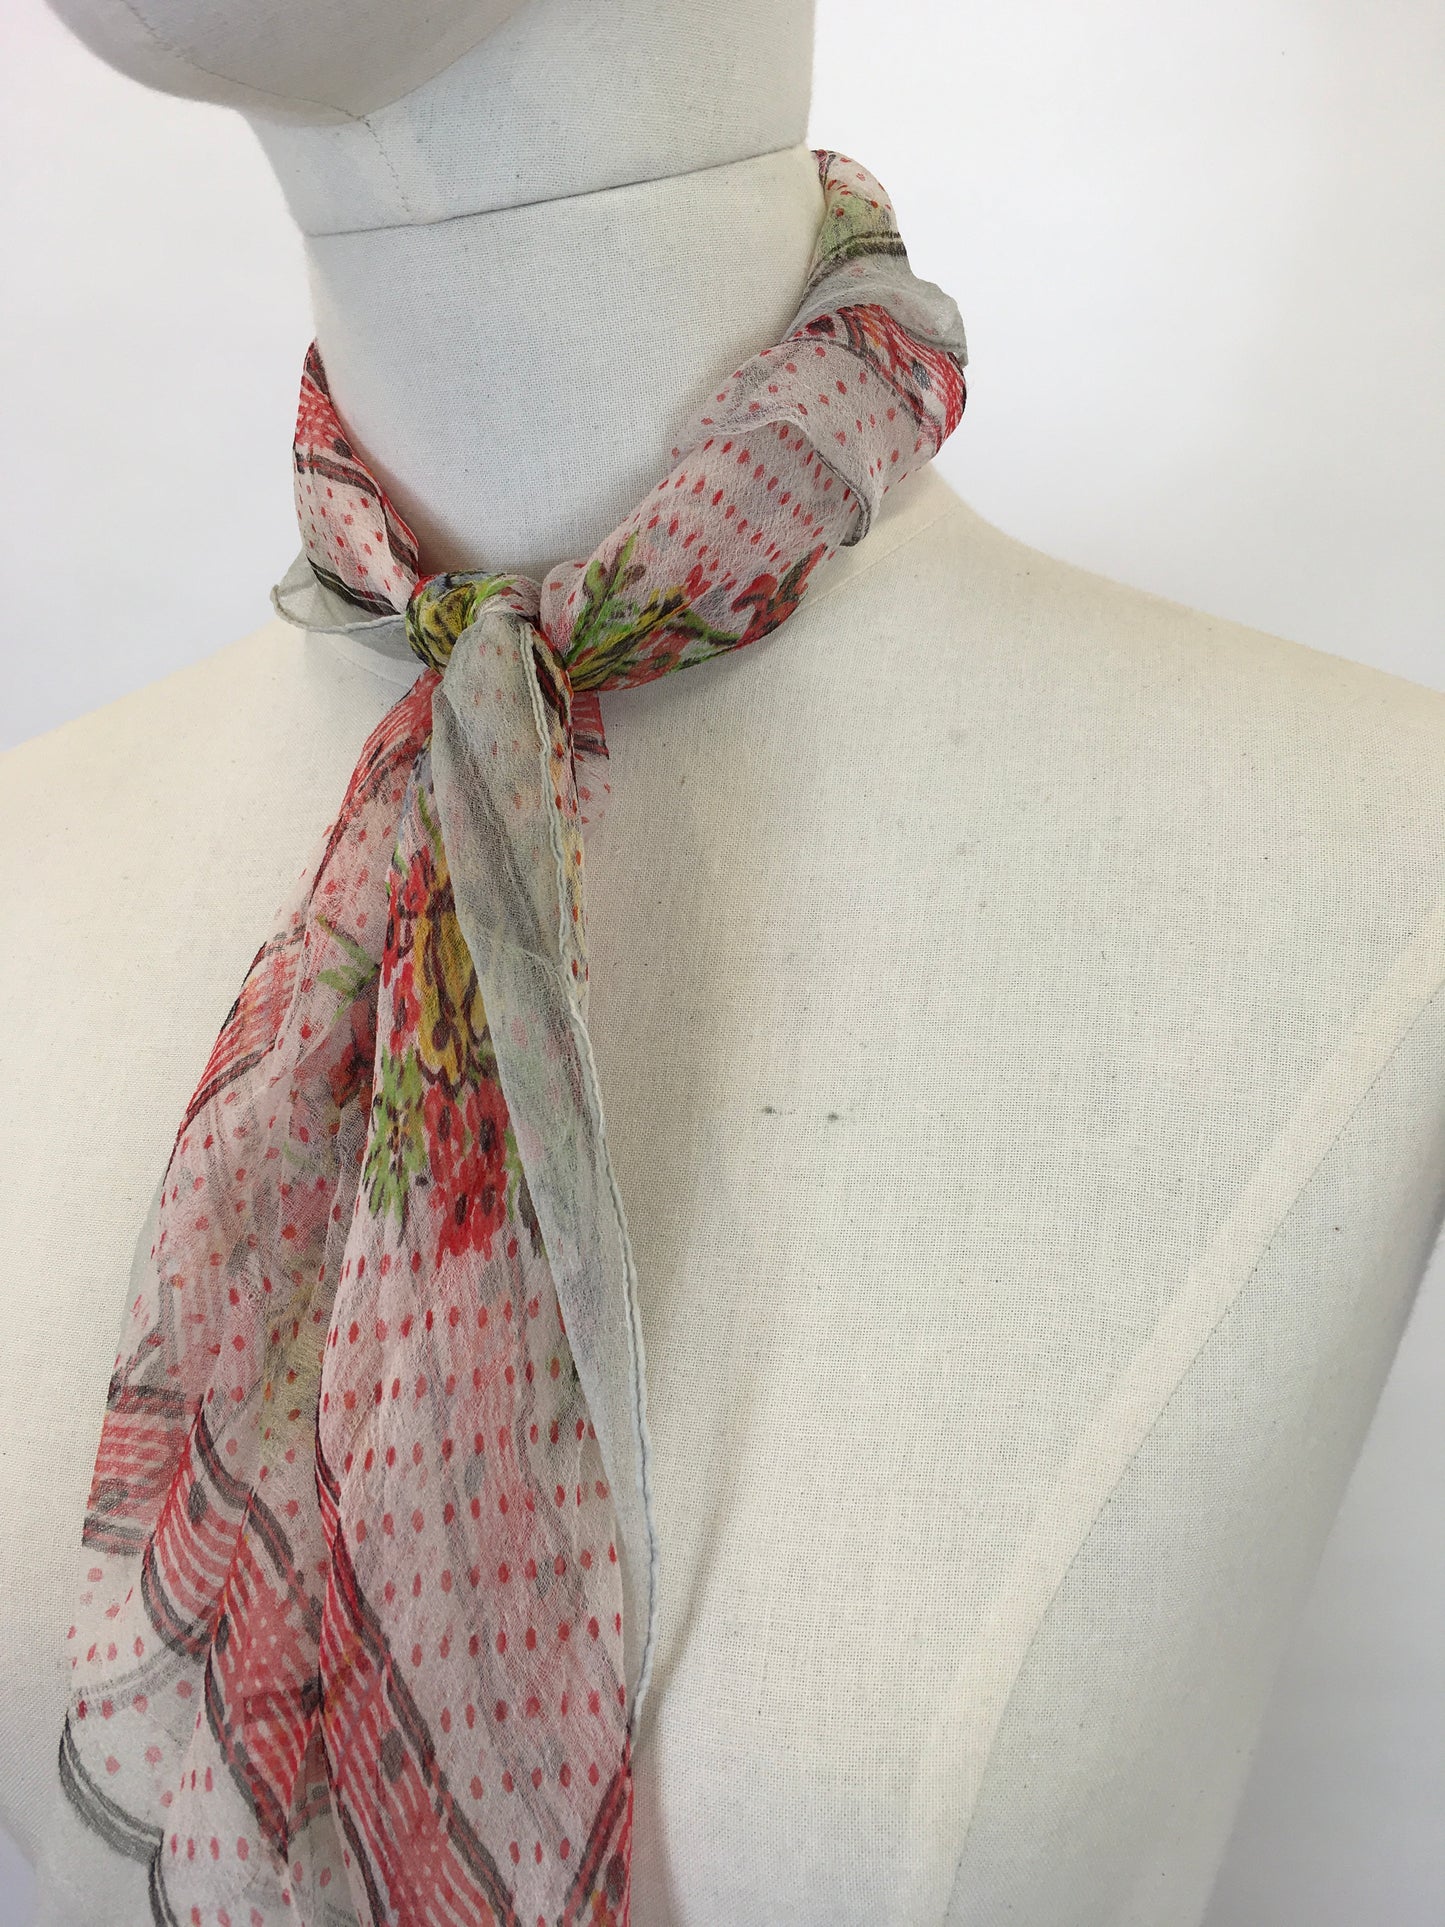 Original Early 1950’s Floral Chiffon Scarf - In Dainty Reds, Yellows, Greens and Blues